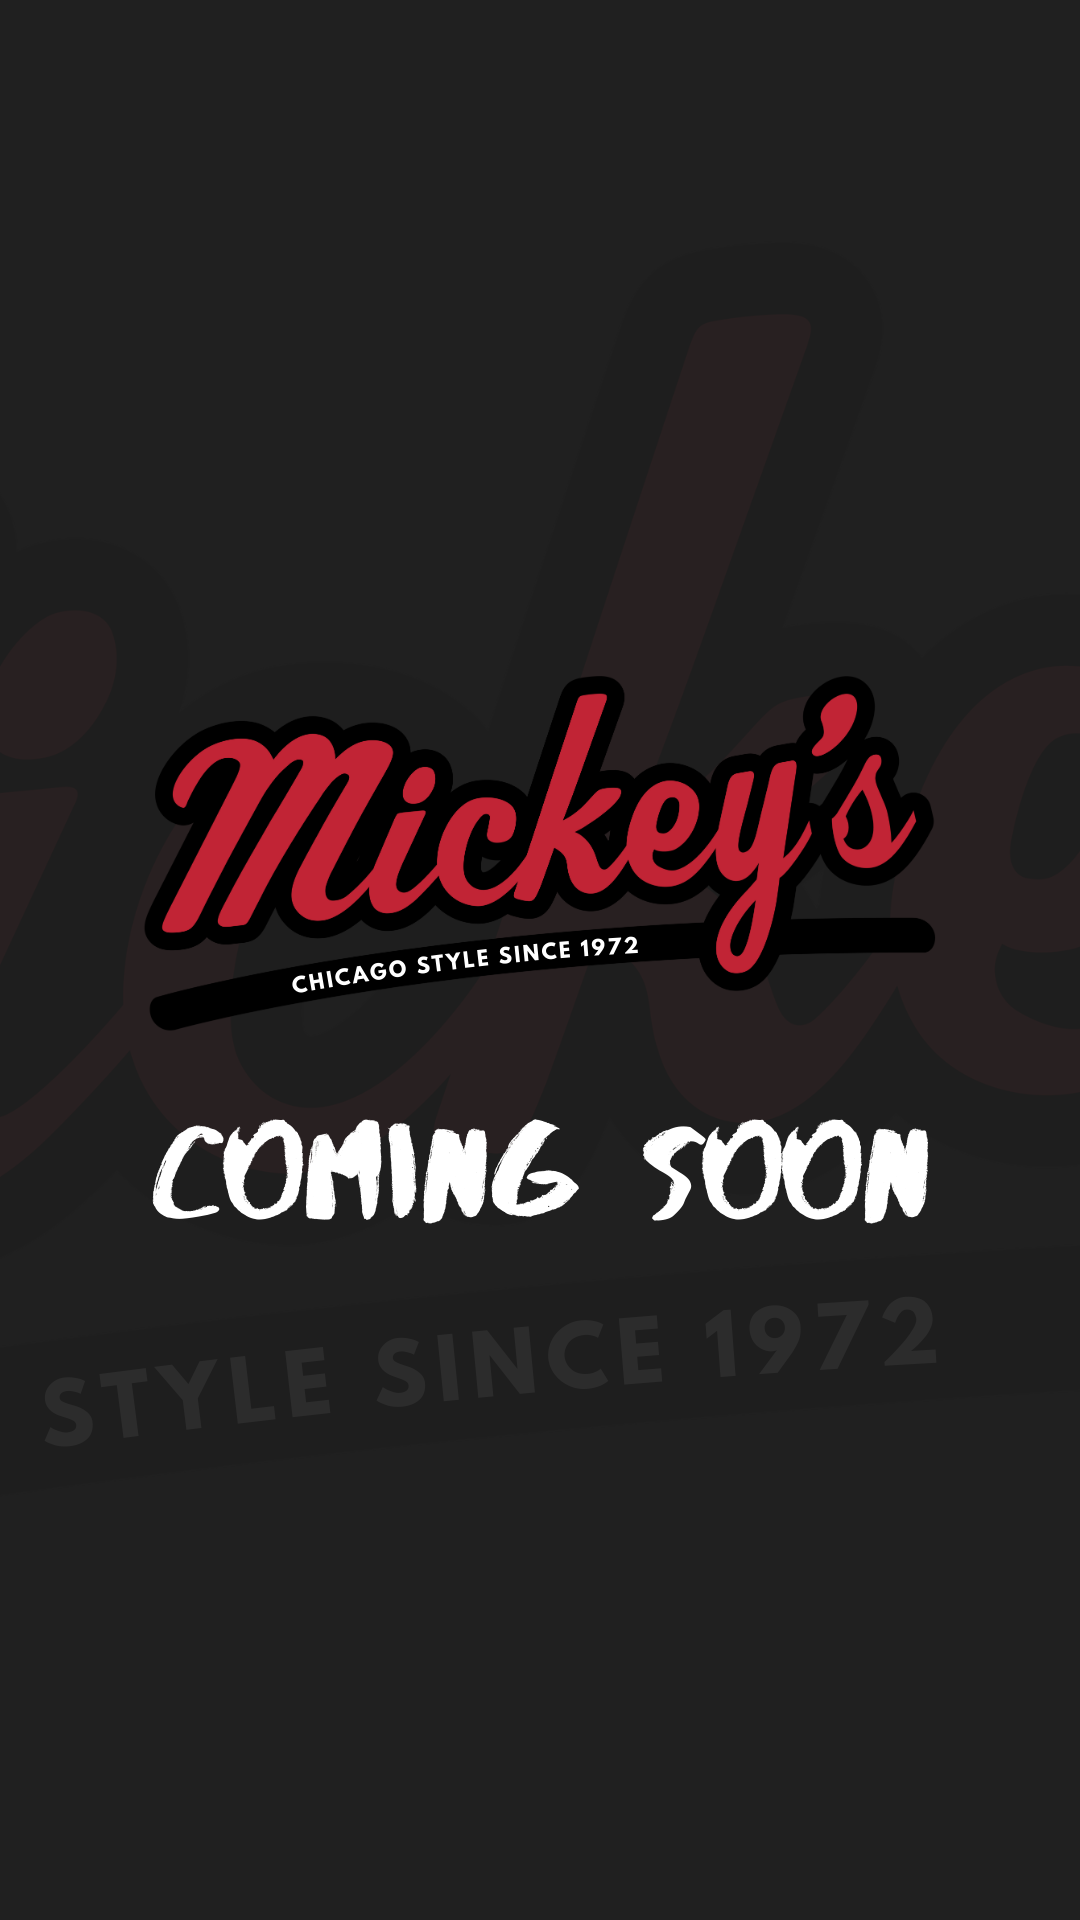 Mickey's logo with Coming soon text